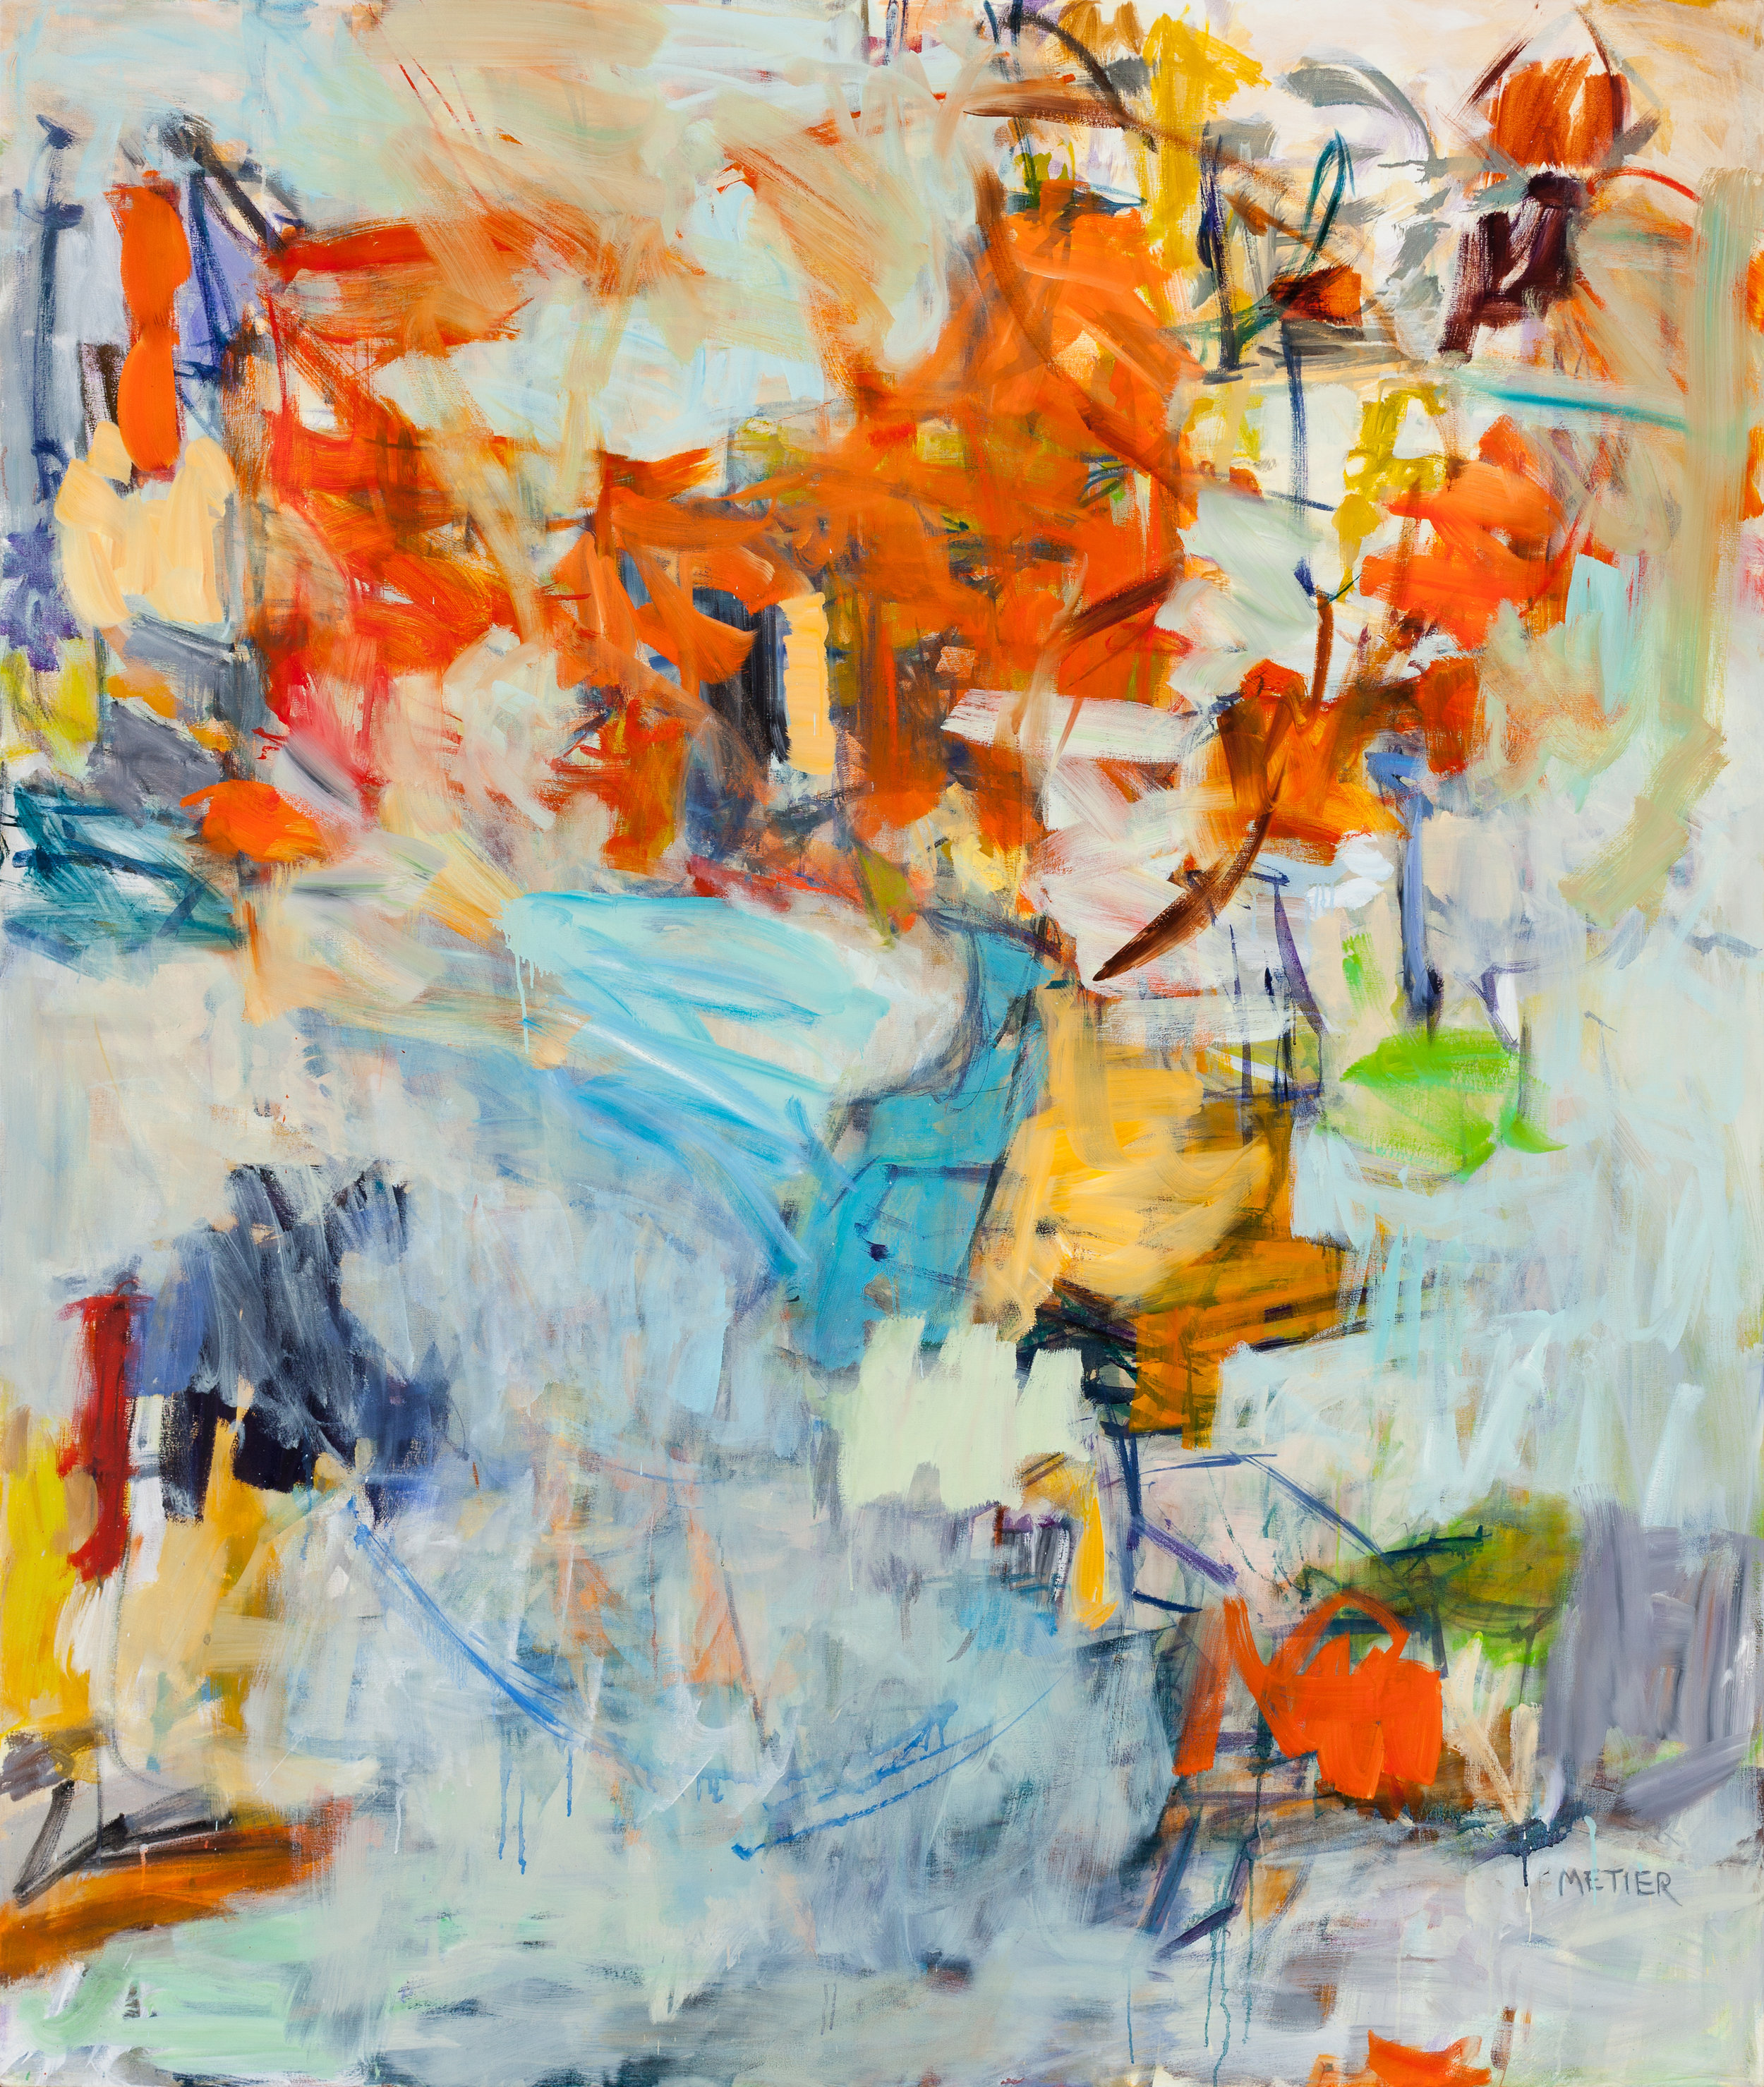 For Amy Metier, A Love Of Emotive Colors Sparks Abstract Works